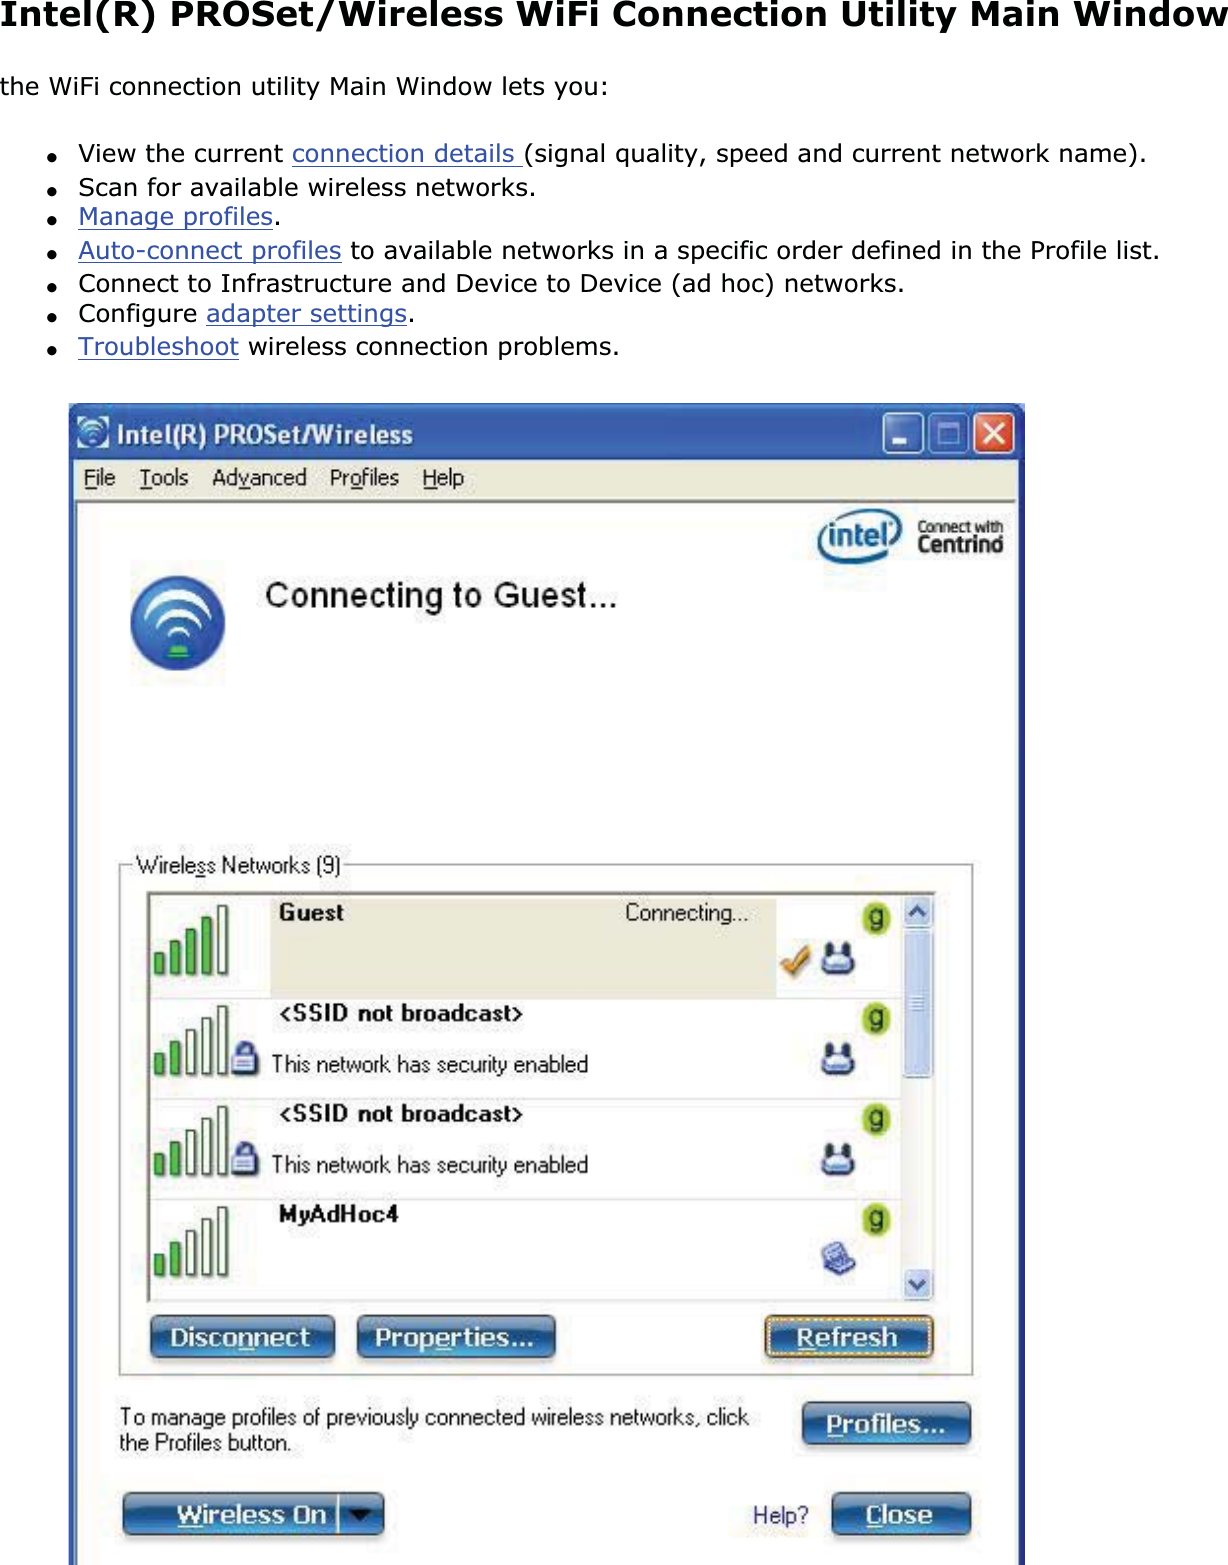 Intel(R) PROSet/Wireless WiFi Connection Utility Main Windowthe WiFi connection utility Main Window lets you:●View the current connection details (signal quality, speed and current network name).●Scan for available wireless networks.●Manage profiles.●Auto-connect profiles to available networks in a specific order defined in the Profile list.●Connect to Infrastructure and Device to Device (ad hoc) networks.●Configure adapter settings.●Troubleshoot wireless connection problems.